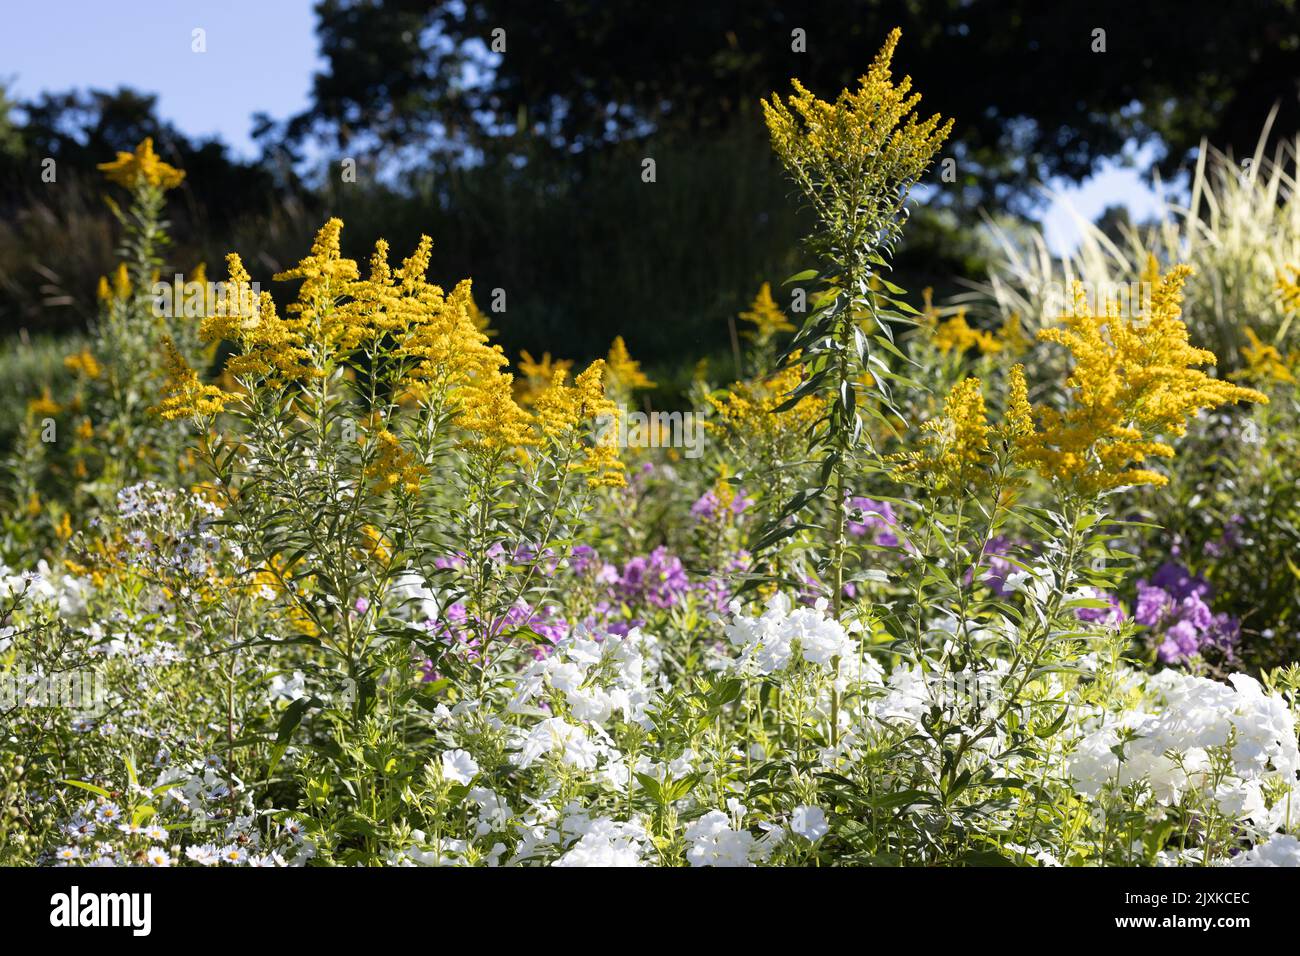 Phlox paniculata 'World Peace' and other flowers in a garden. Stock Photo